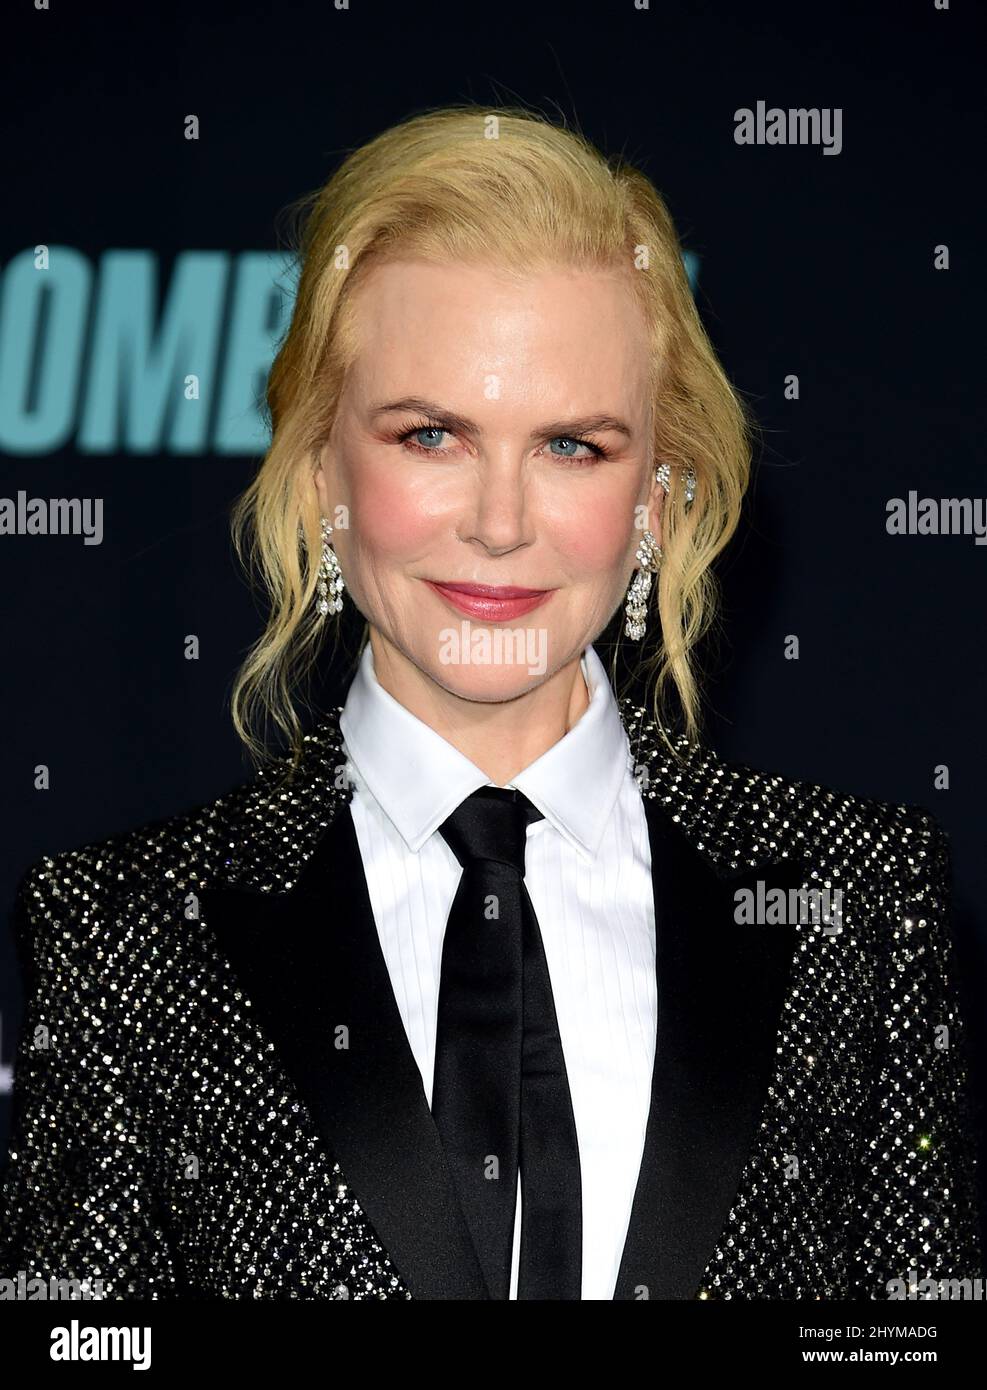 Nicole Kidman at the special screening of Lionsgate's "Bombshell" held at the Regency Village Theatre on December 10, 2019 in Westwood, Stock Photo